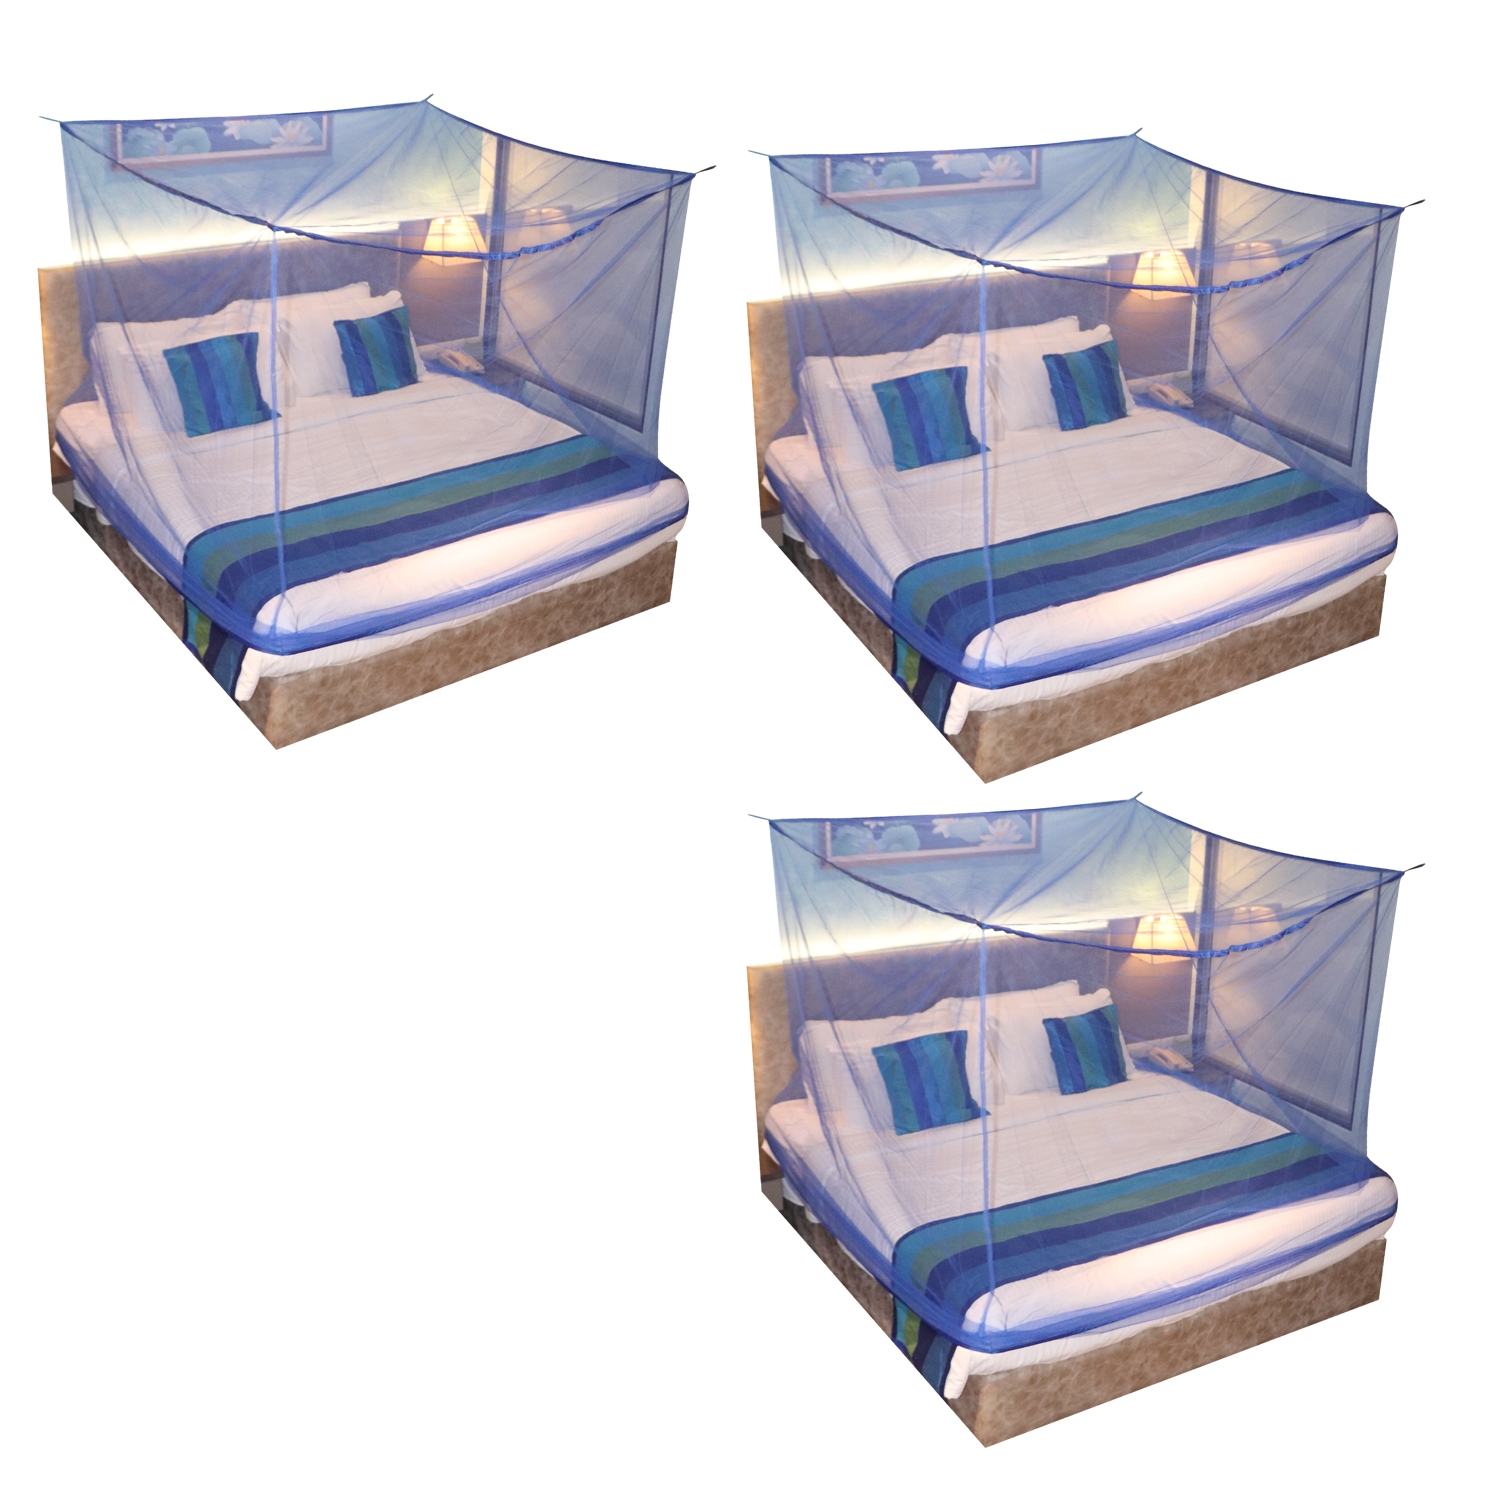 Paola Jewels | Mosquito Net for Double Bed, King-Size, Square Hanging Foldable Polyester Net BluePack of 3 3